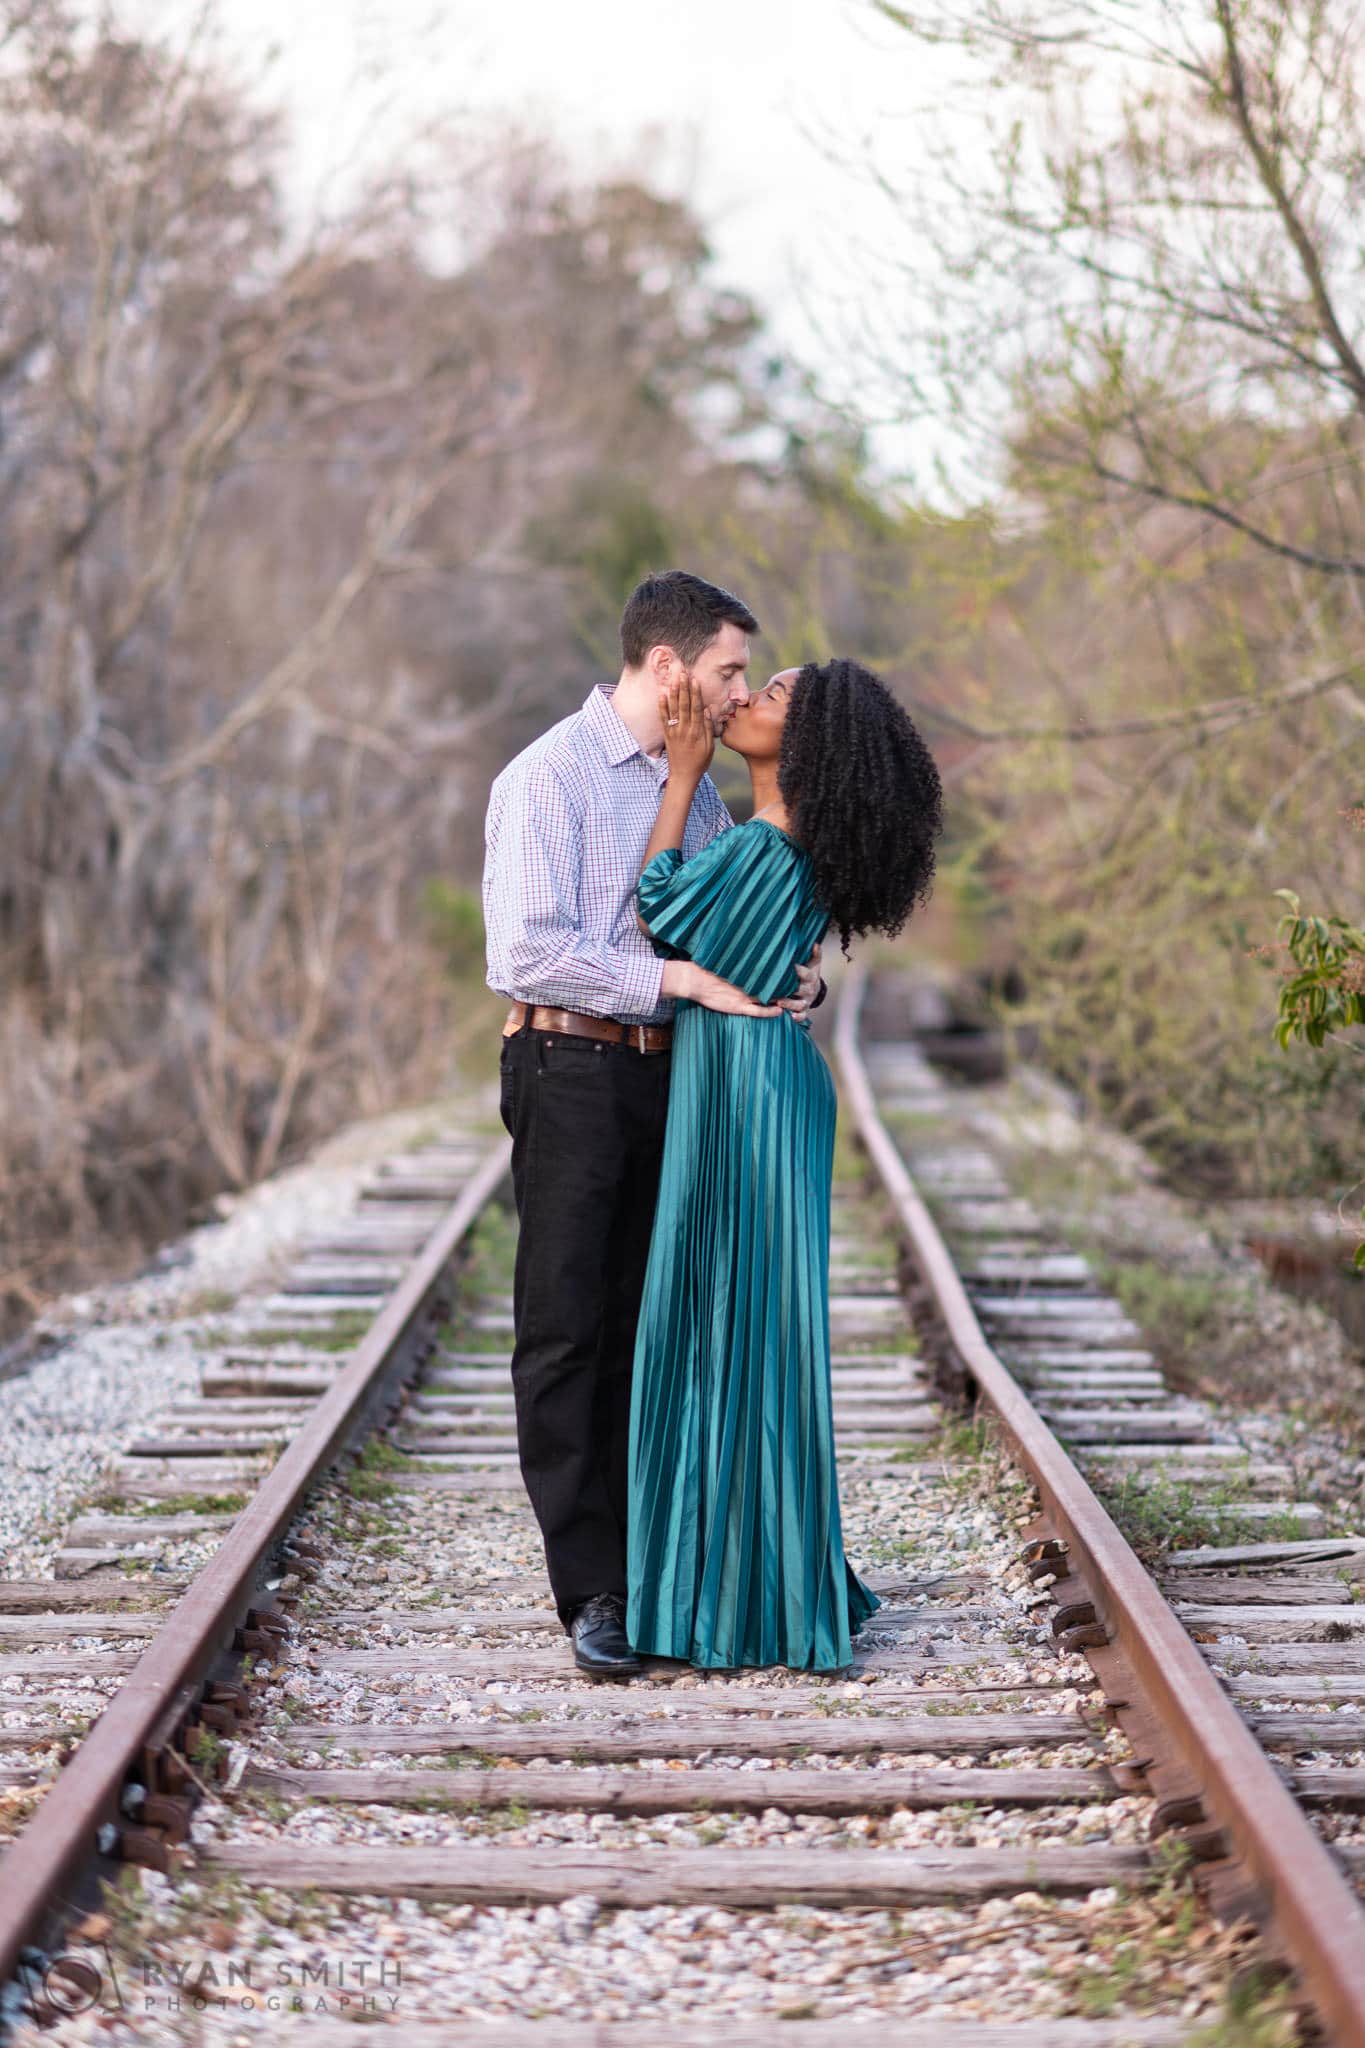 Kiss on the old train tracks - Conway Riverwalk